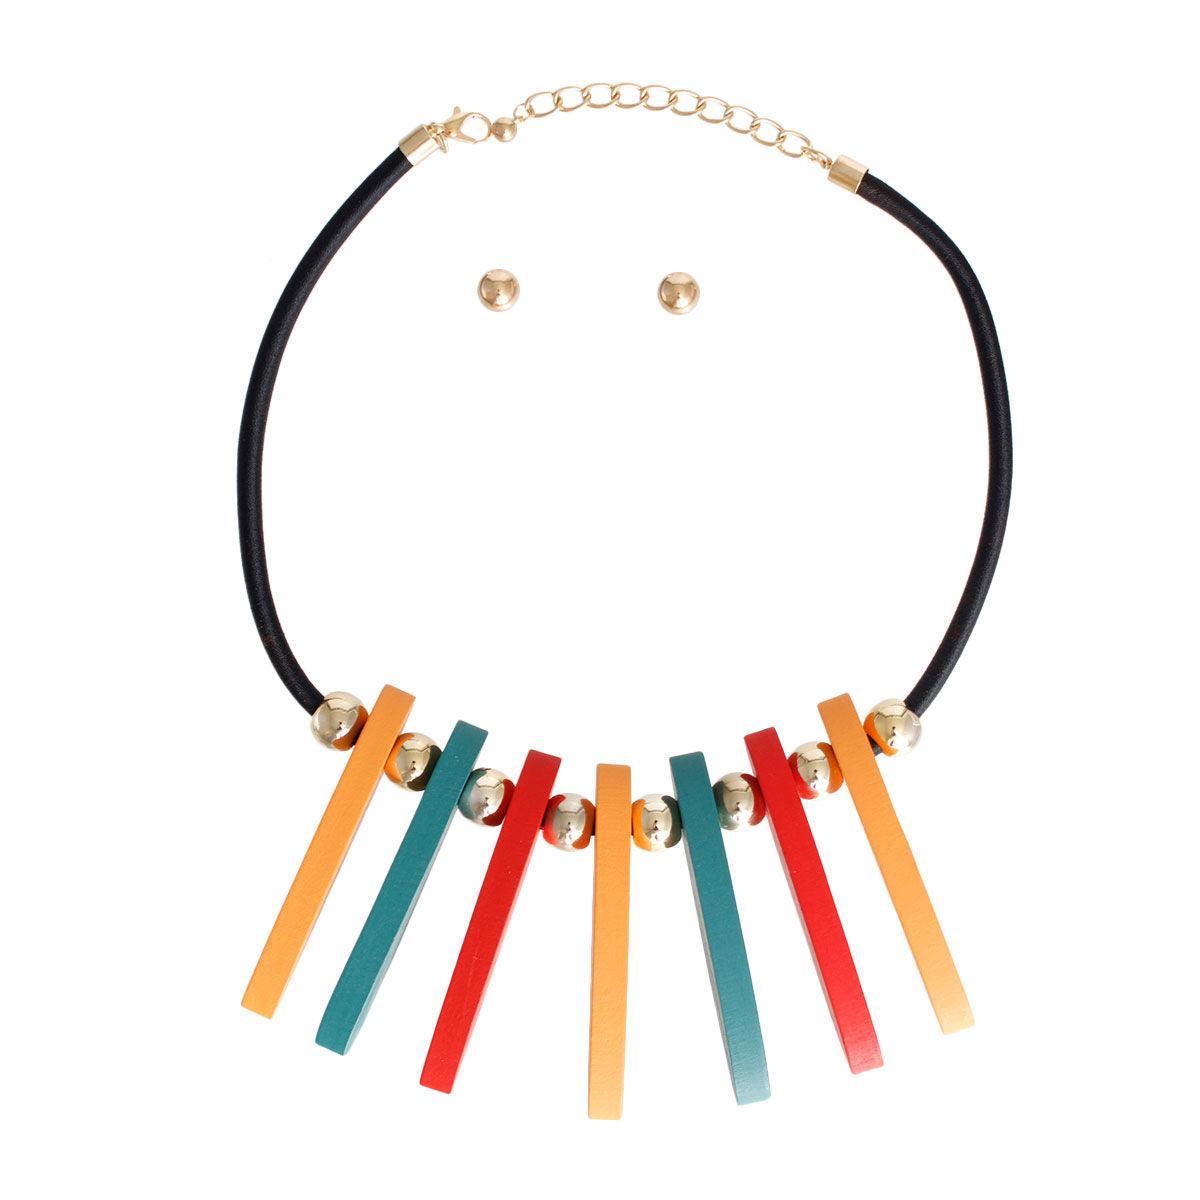 Bohemian Wood Beaded Necklace: Make a Multicolor Statement